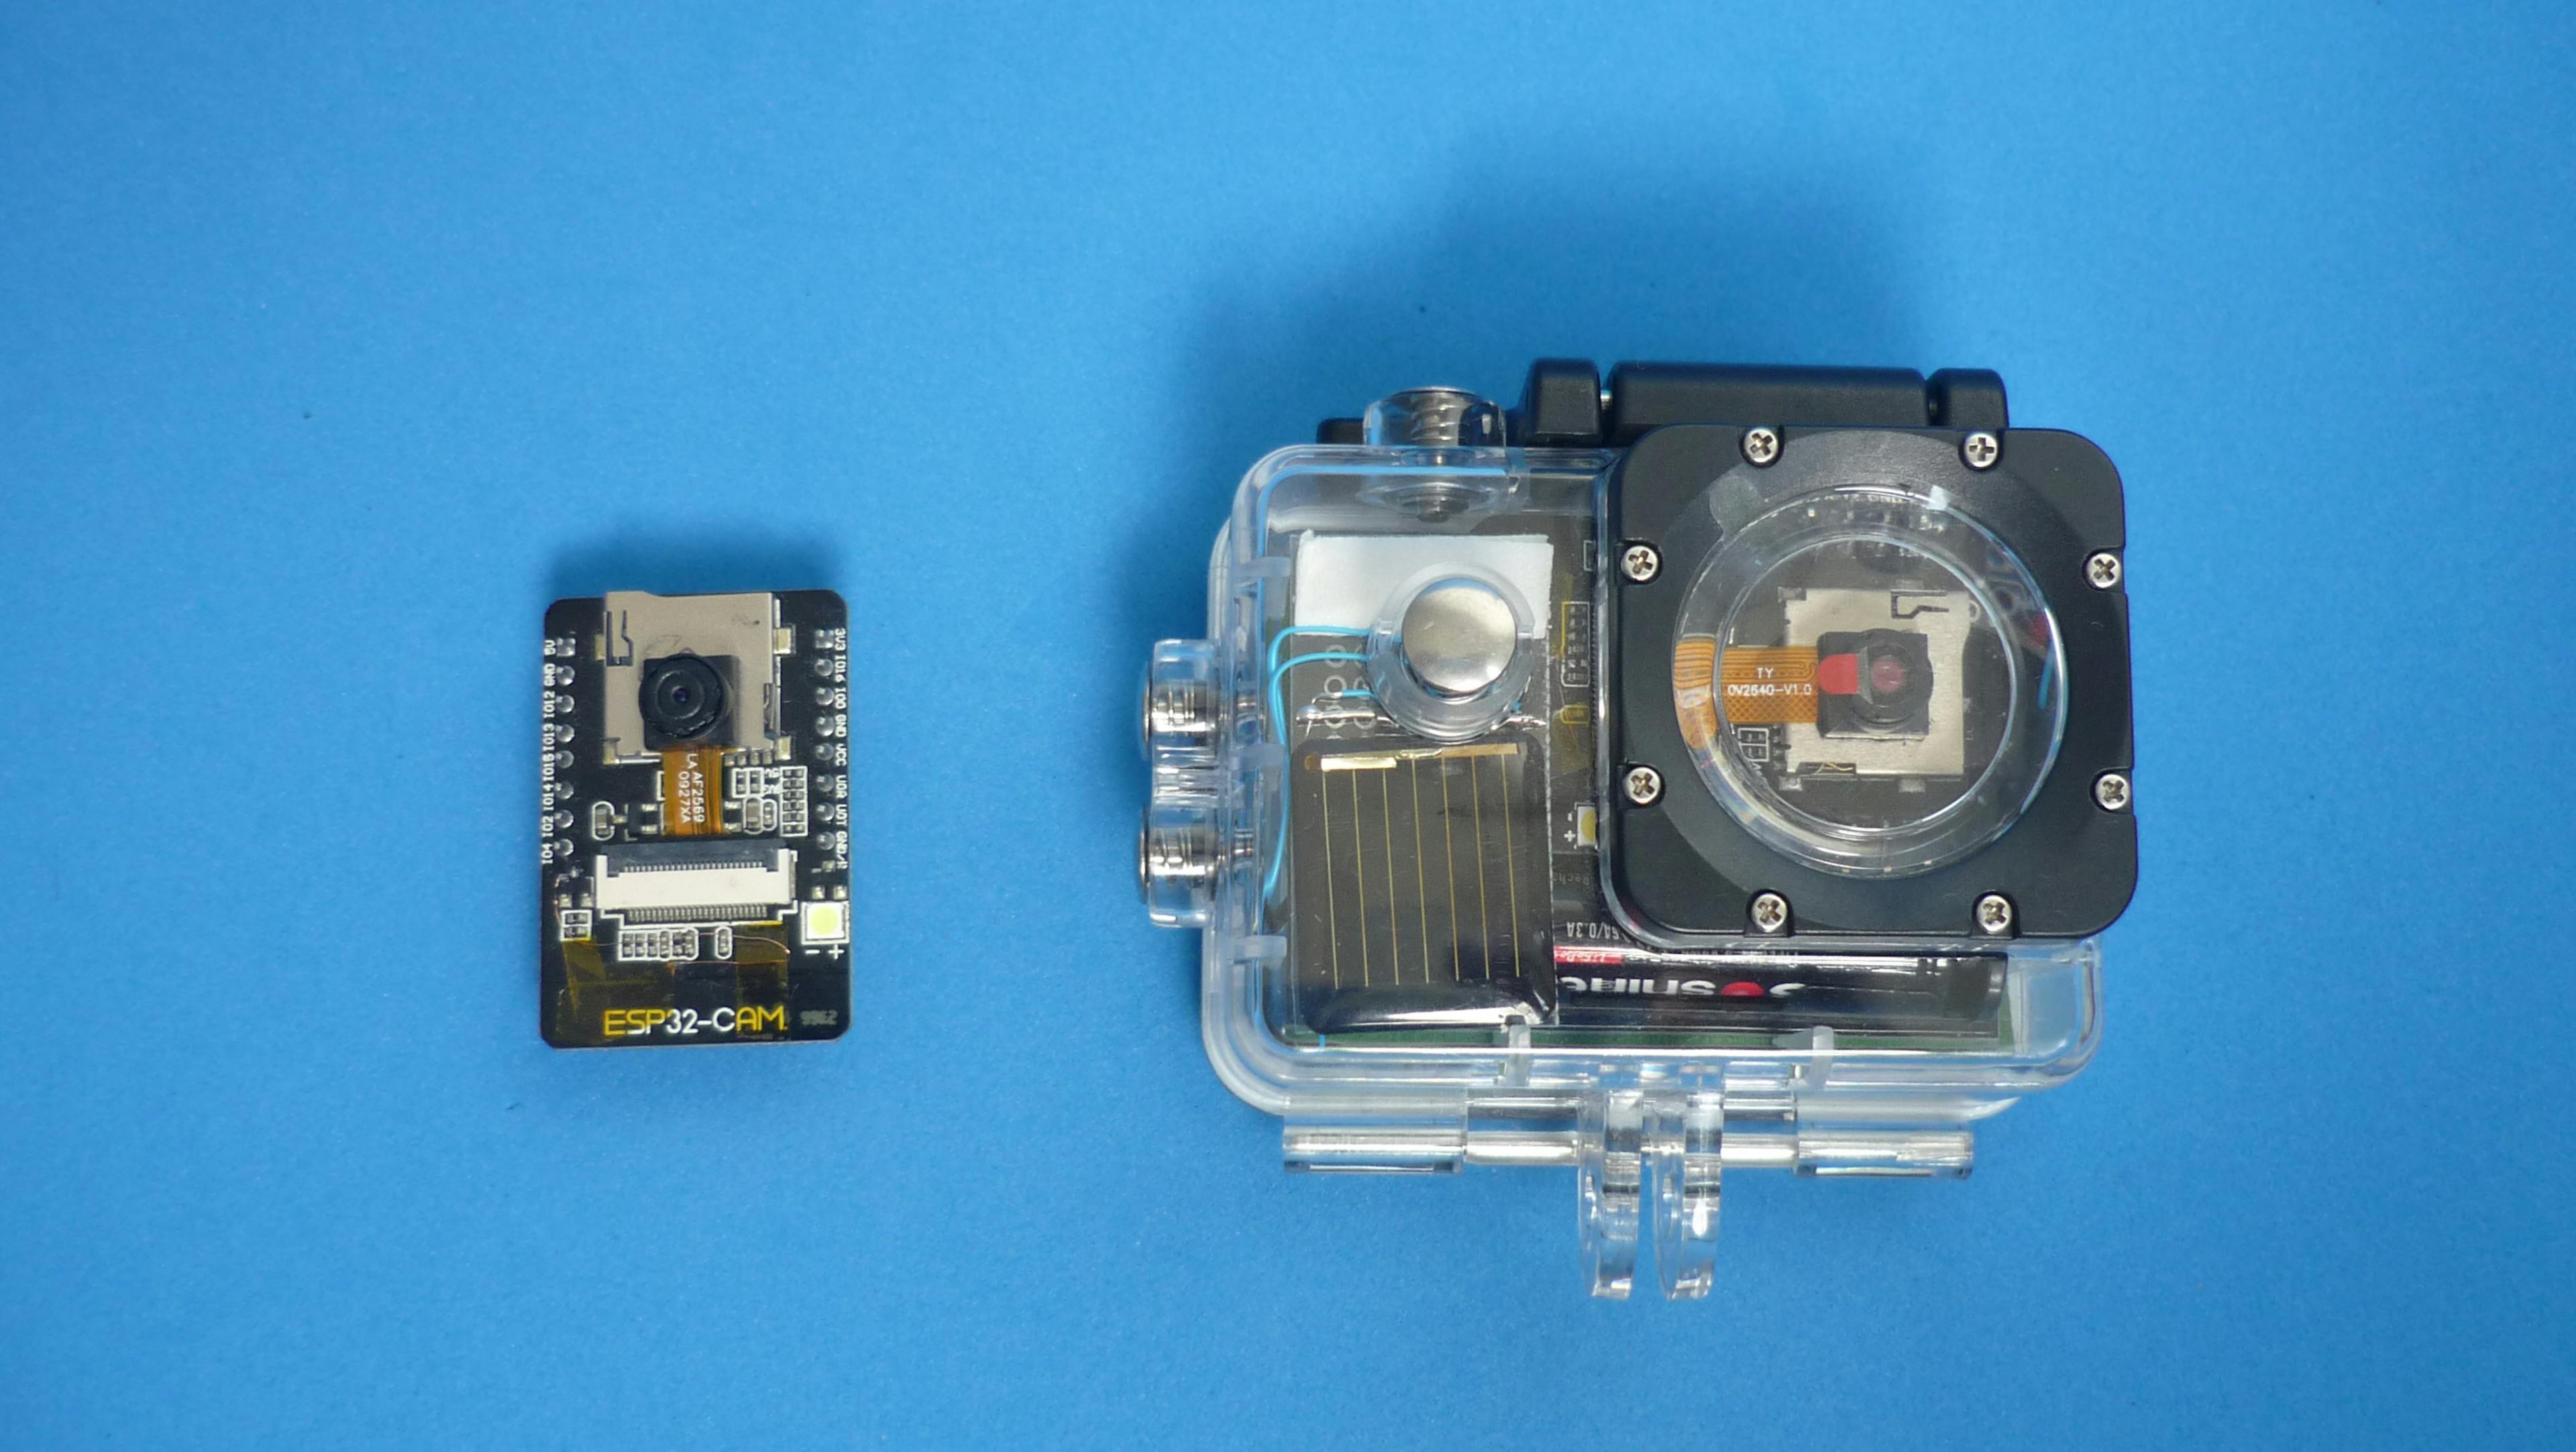 Solar harvesting Wi-Fi camera ready to be placed outside